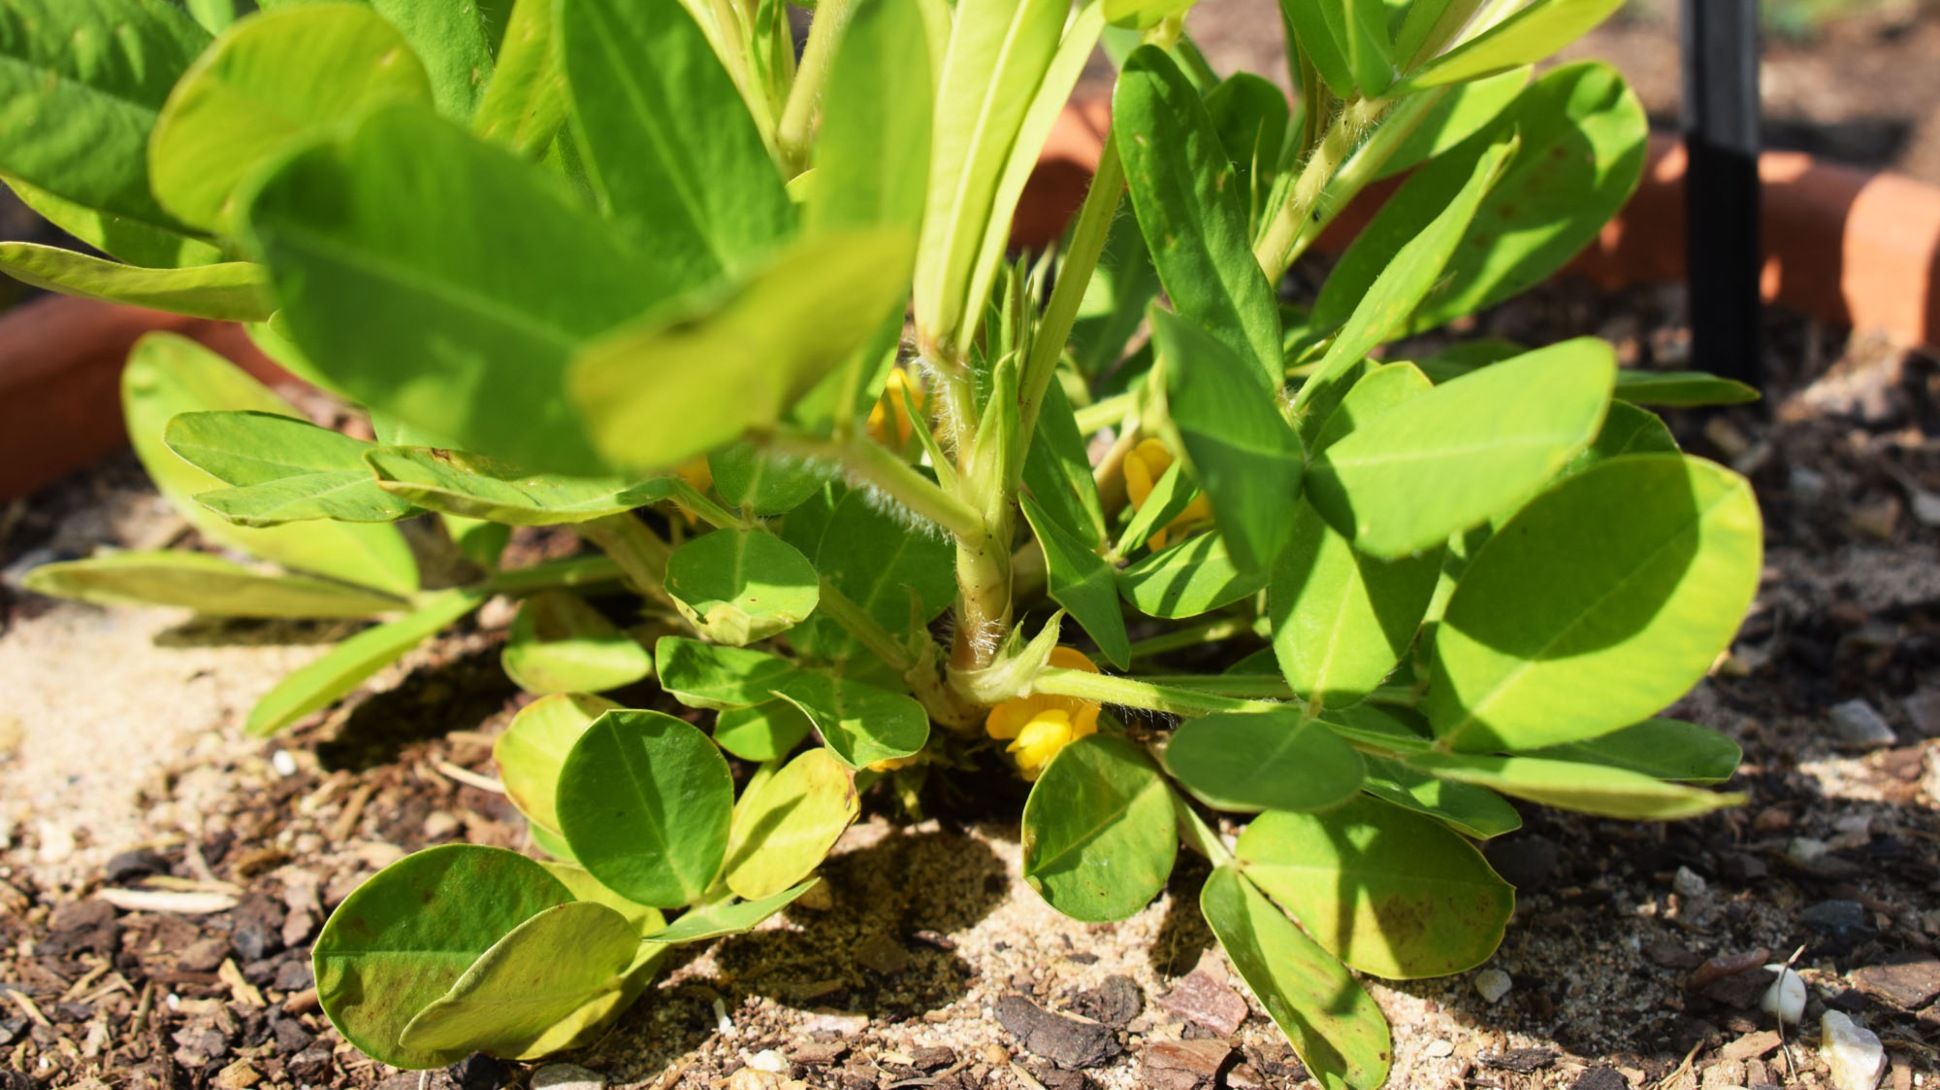 A leafy green plant with a small yellow flower near the centre